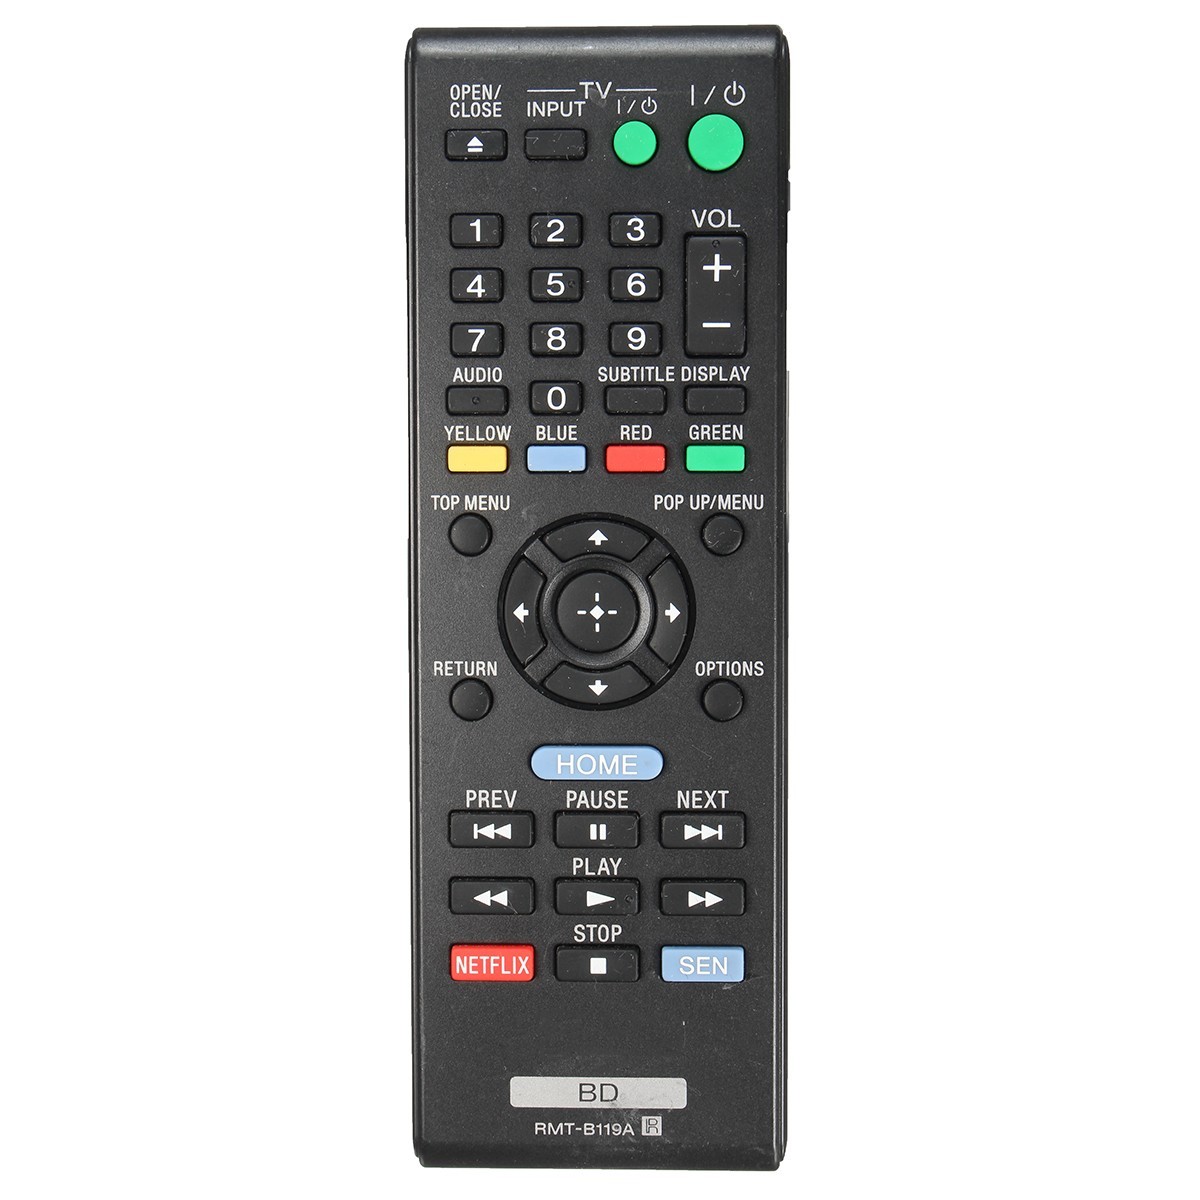 Blue Ray Remote Control RMT-B119A fit for Sony BDP-BX59 BDP-S390 BDP-S590 - $8.82